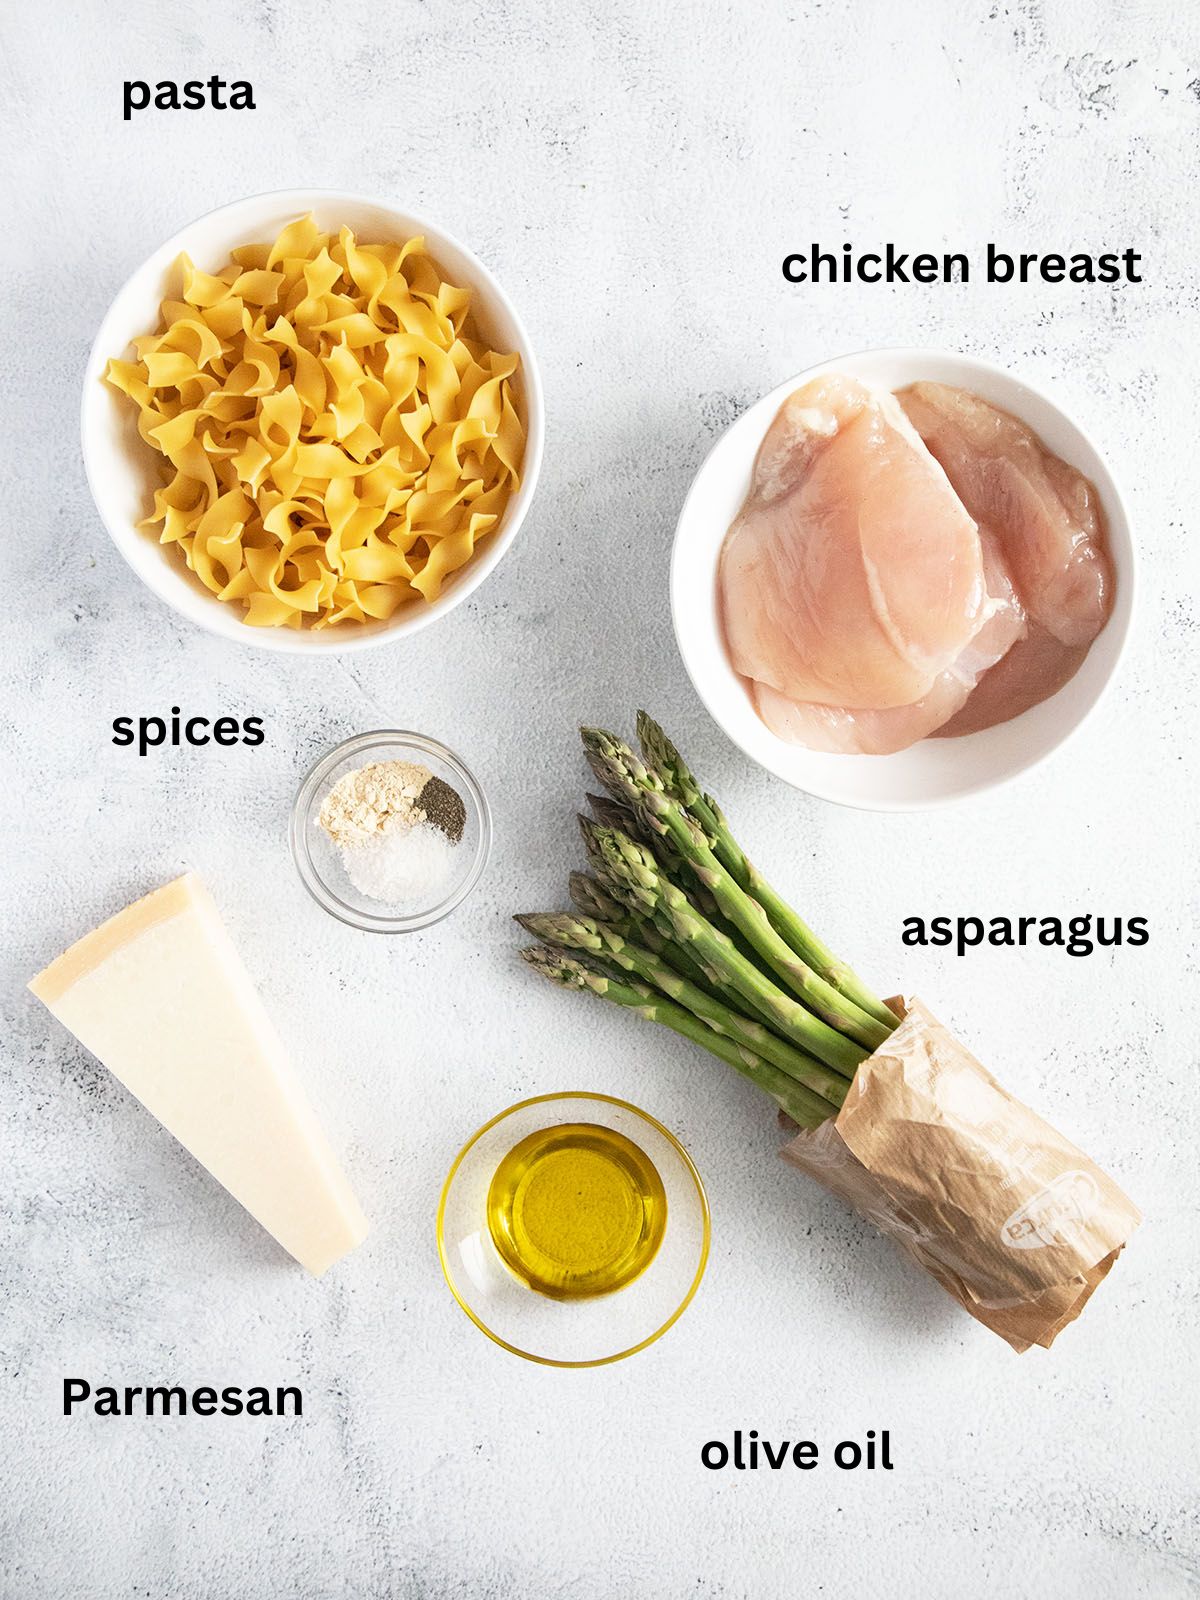 asparagus spears, parmesan, olive oil, pasta and chicken breast in bowls.